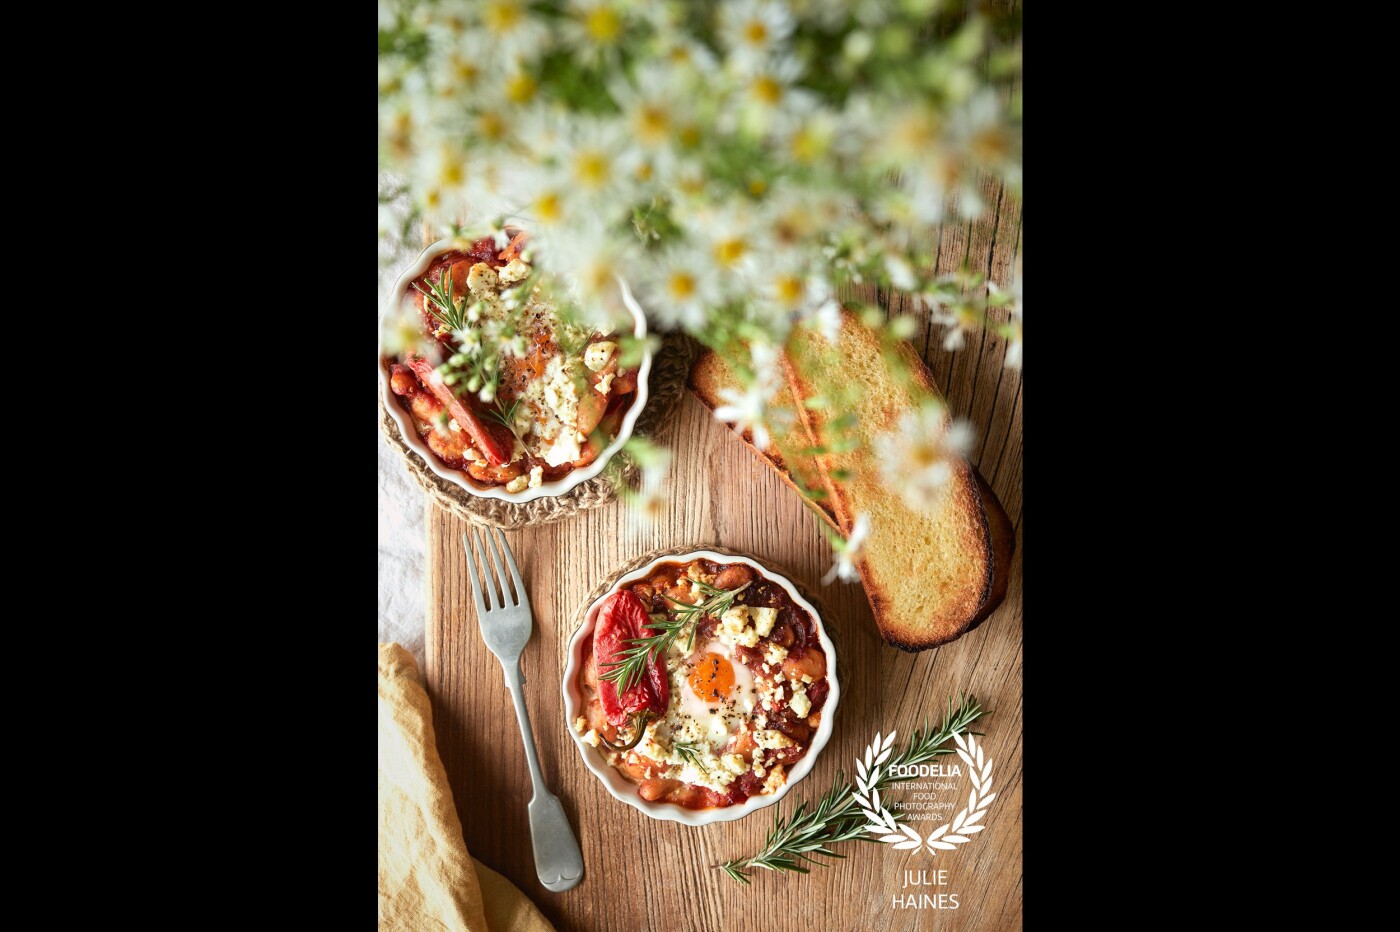 Baked eggs with homemade baked beans, a favorite homemade Sunday breakfast for our family. This image was shot with natural light. Canon 5D Mark IV and 50mm Sigma Art Series Lens.